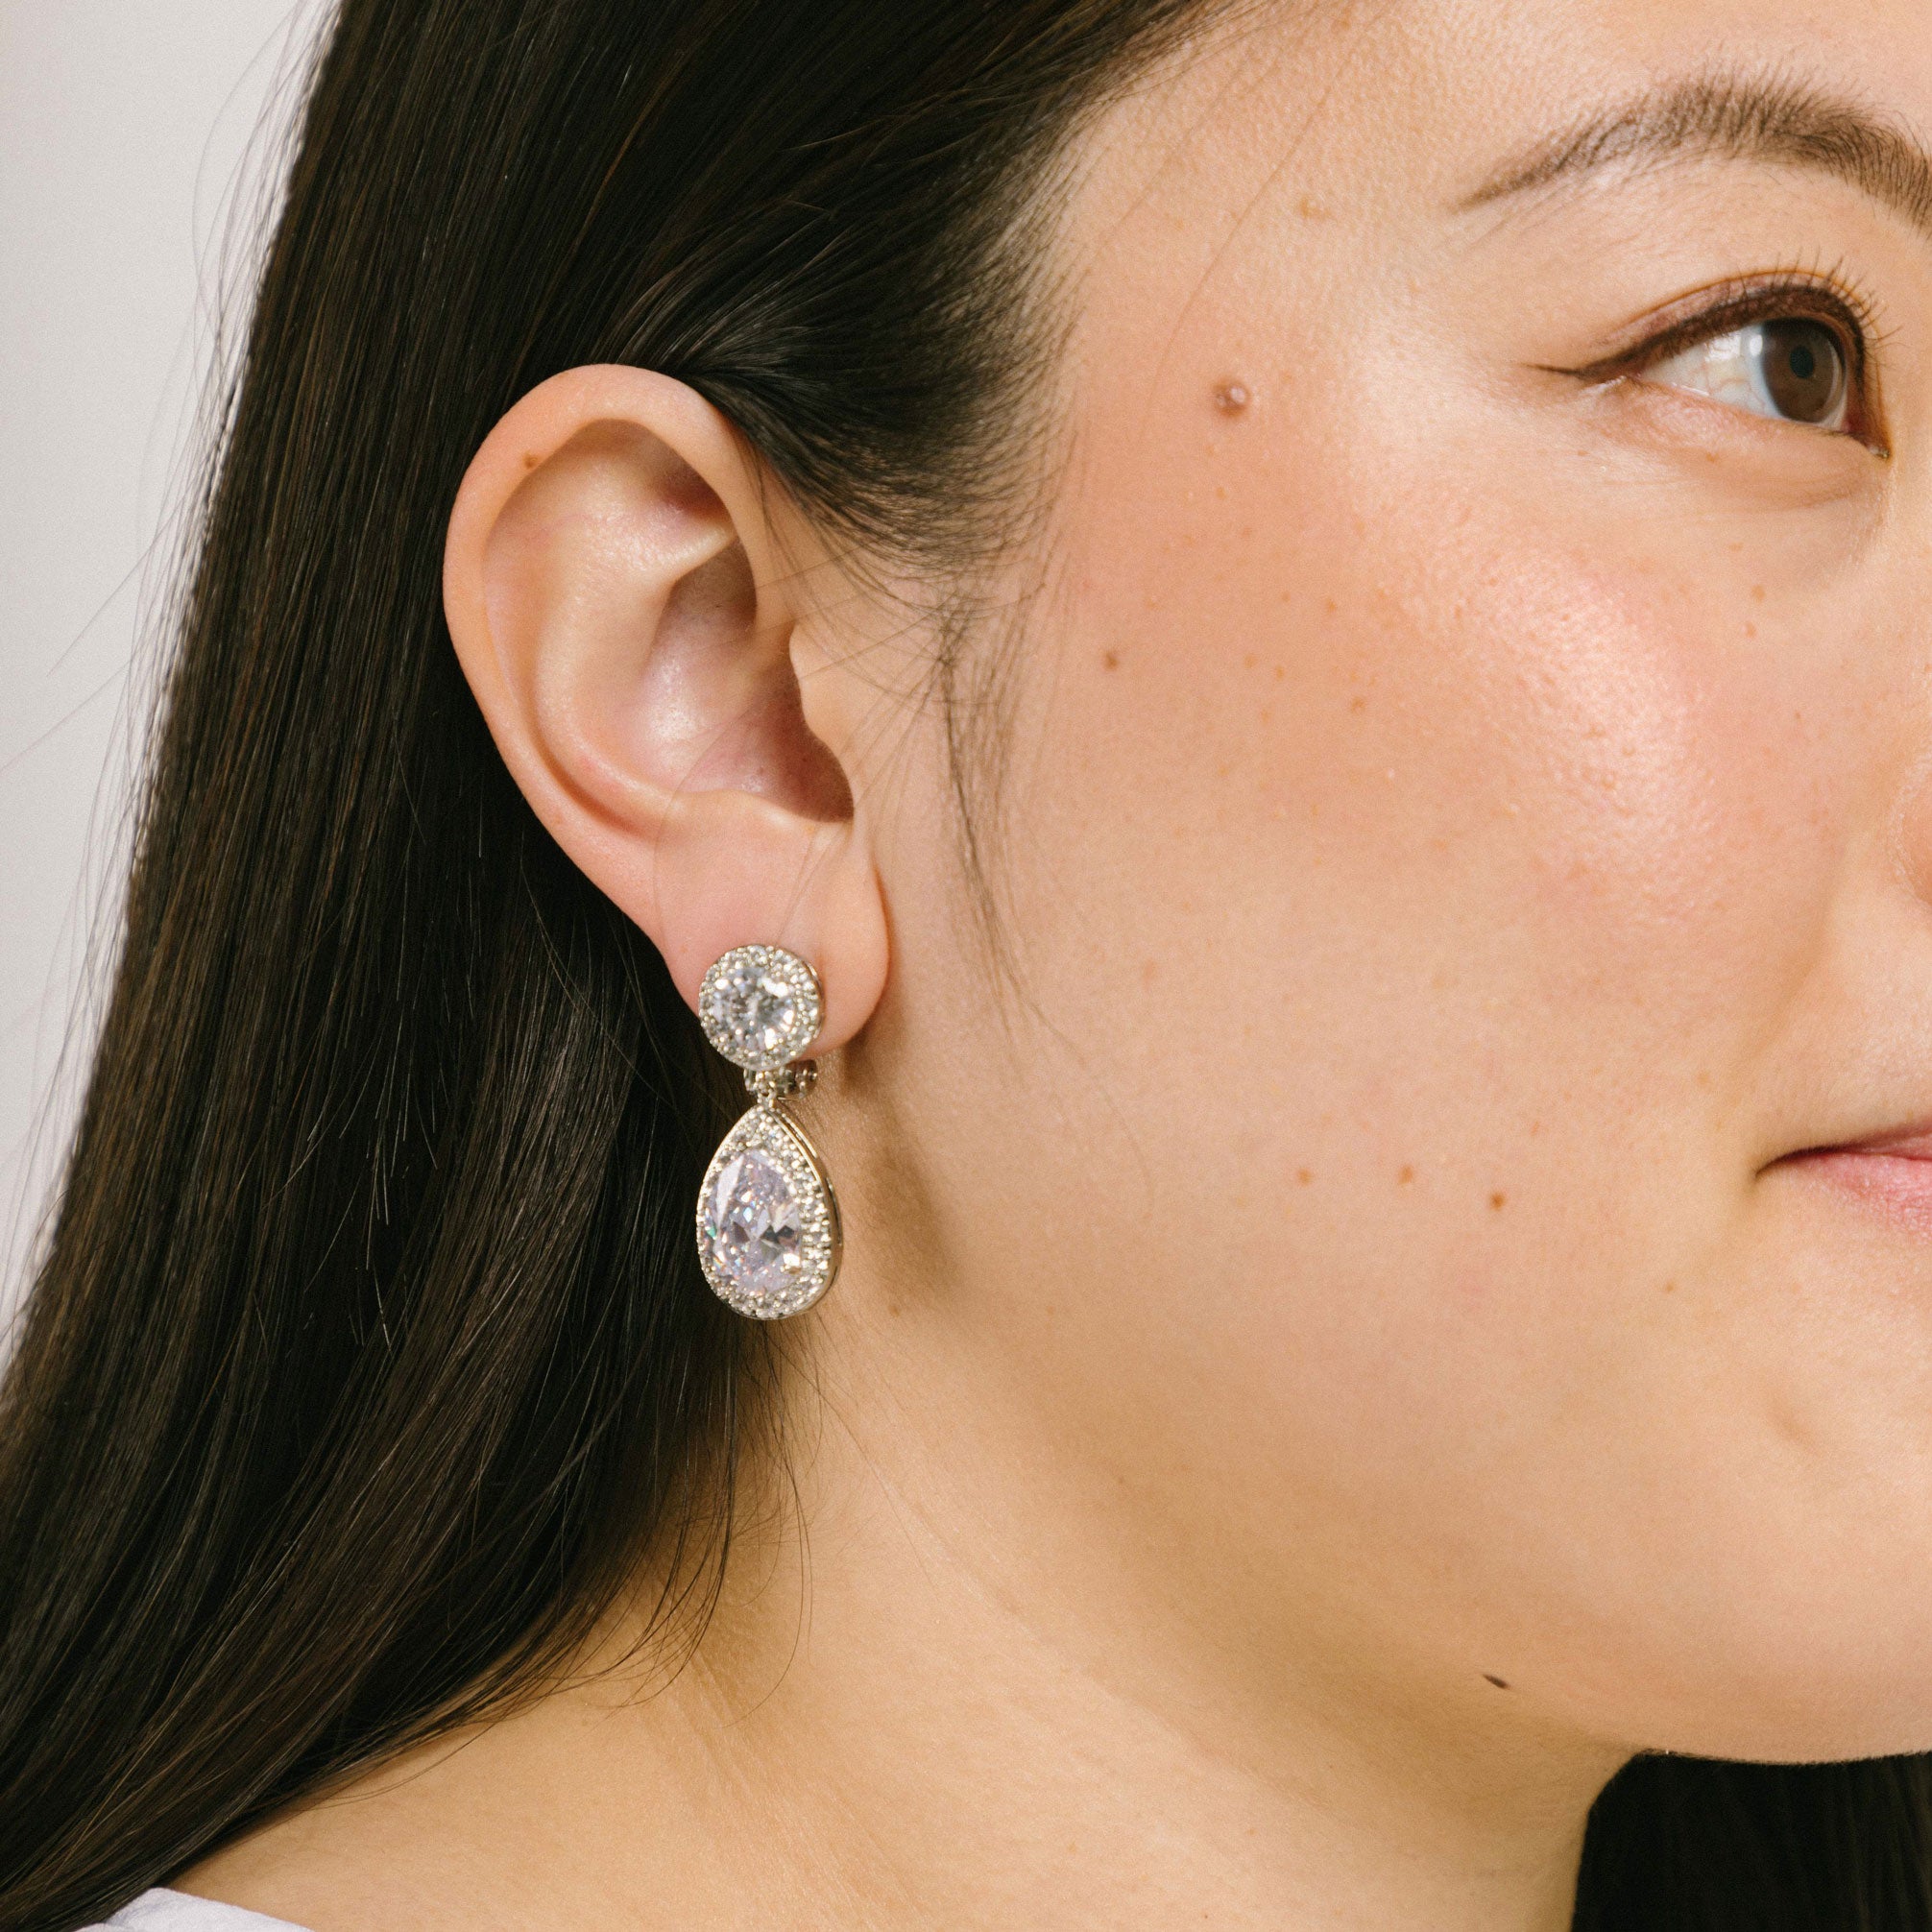 A model wearing the Eleanor Clip-On Earrings include a padded clip-on closure, secure hold, and long wear duration. This single pair of earrings is made of silver plated copper alloy and Cubic Zirconia, and is free from Lead, Nickel, and Cadmium. The adjustable rubber padding is removable.